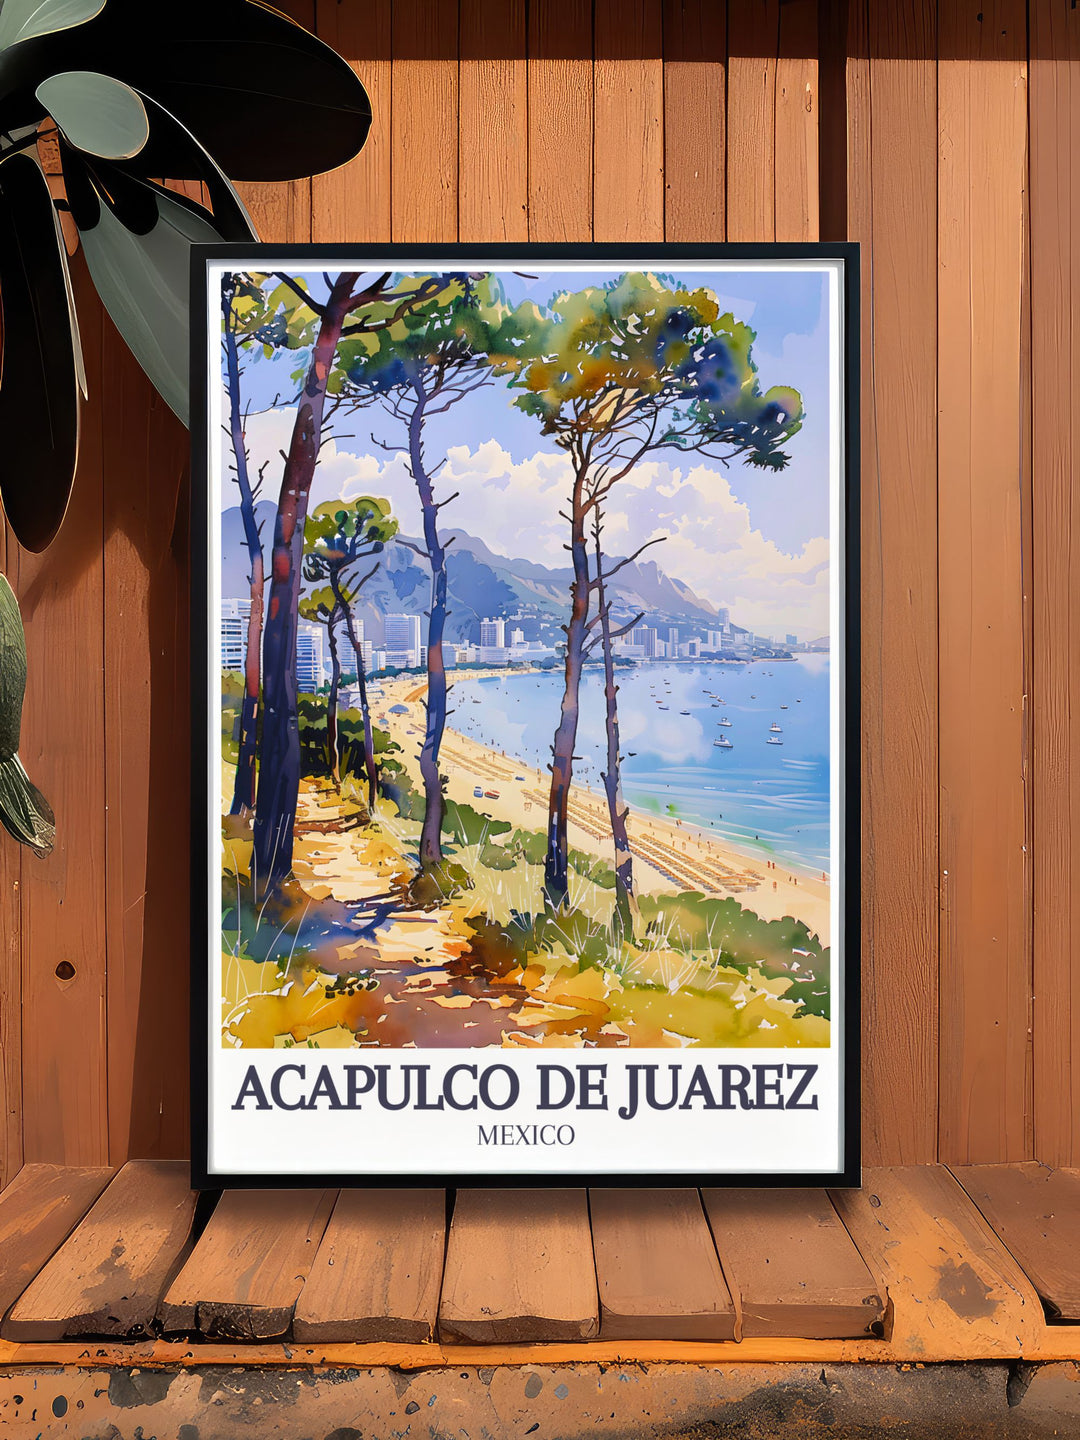 mmerse yourself in the vibrant nightlife and scenic beauty of Playa Condesa with this travel poster, showcasing one of Acapulco de Juárezs most famous beaches.